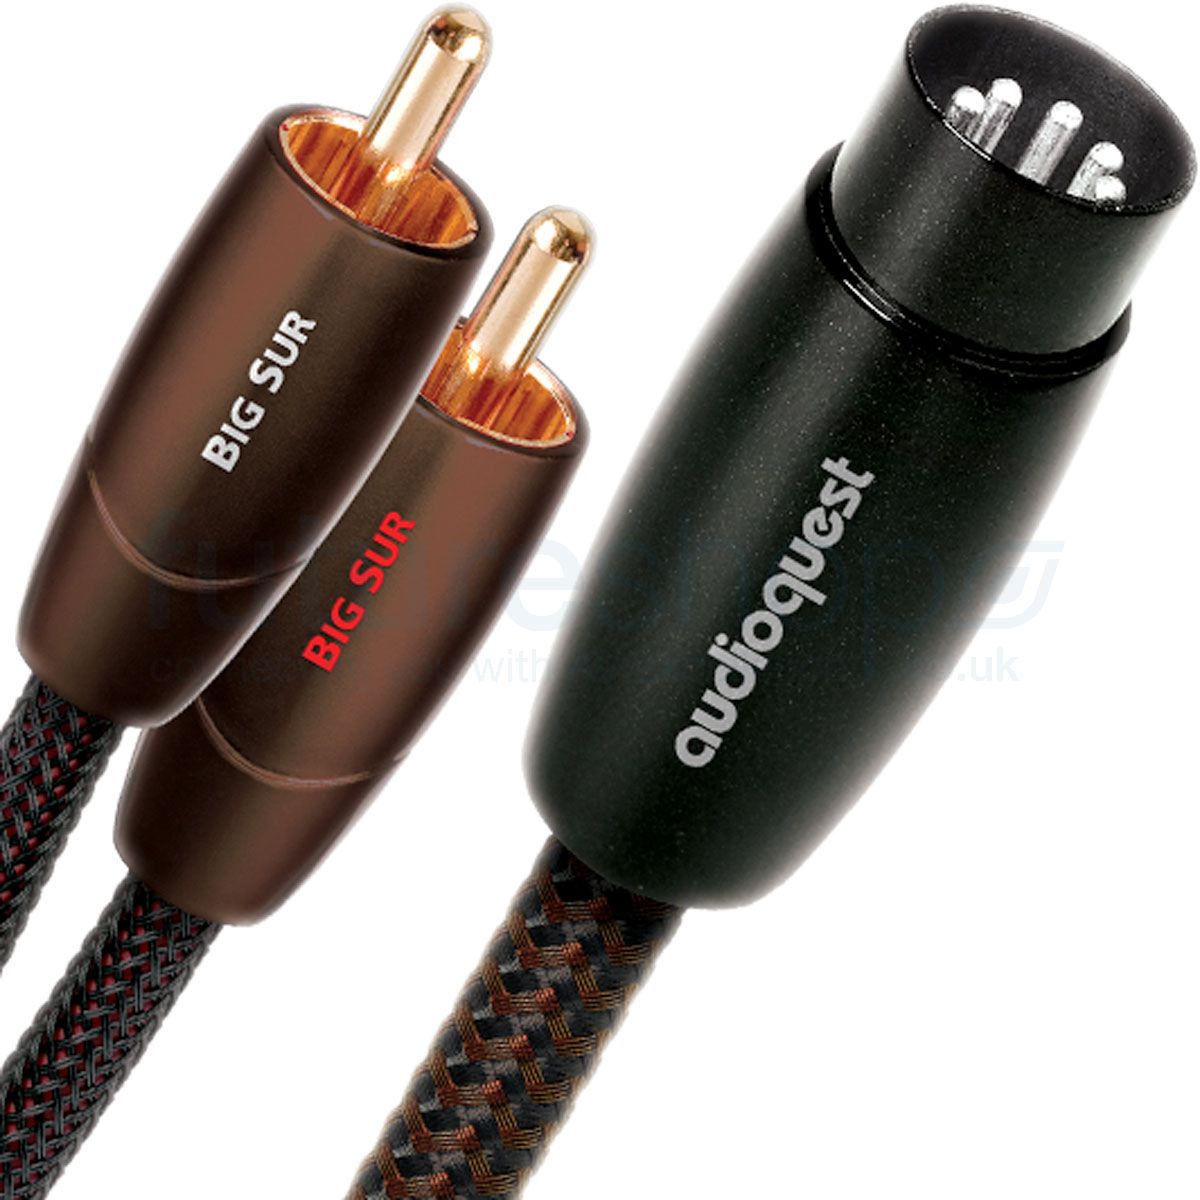 Audioquest S-5  4.5 meter S-video cable 